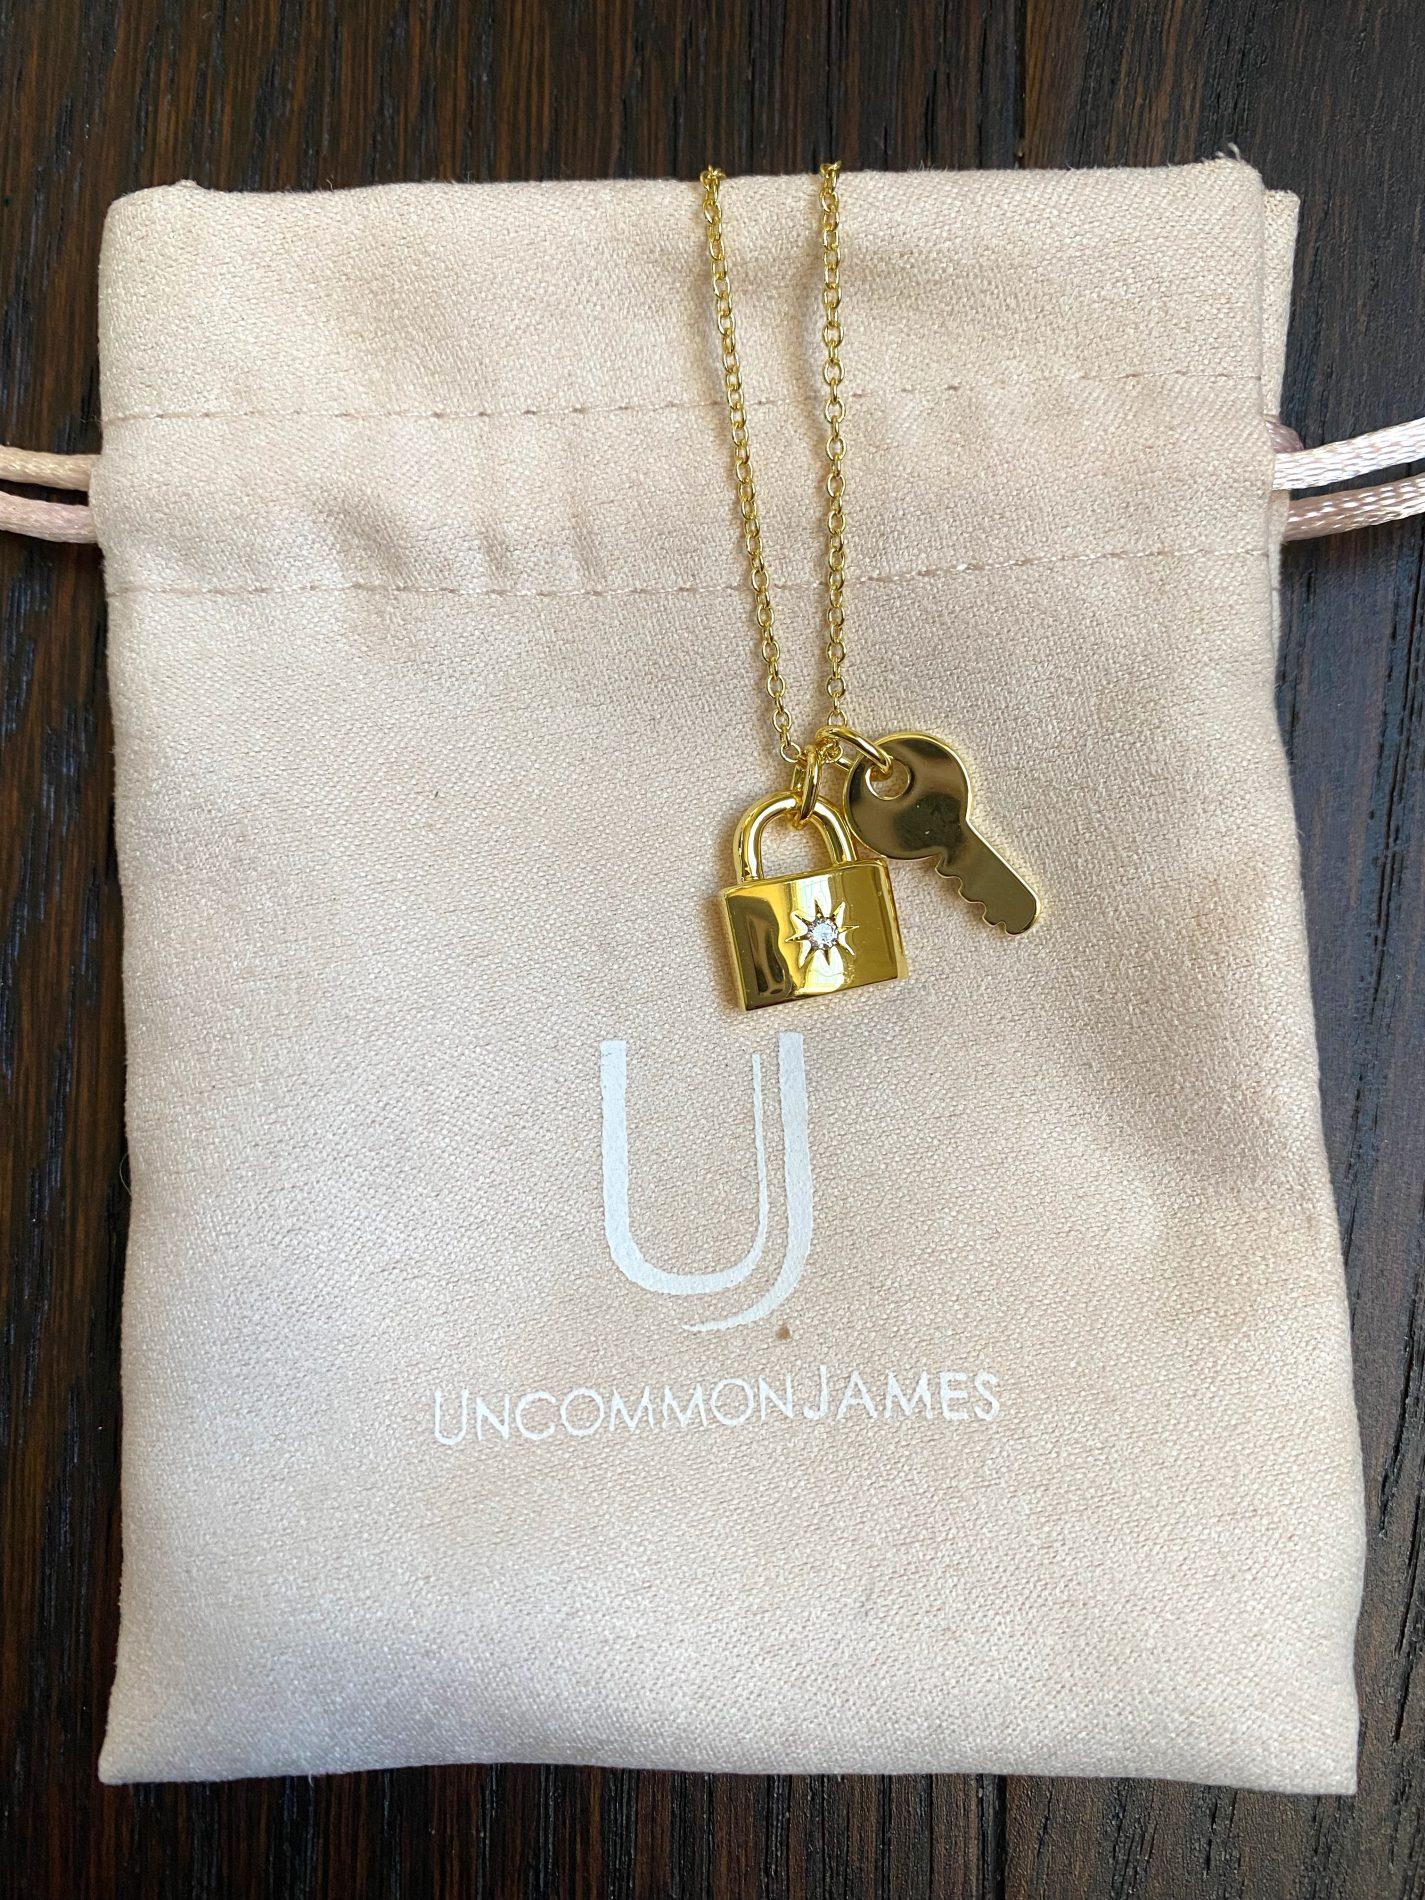 Uncommon James Monthly Mystery Item Review – Winter 2021